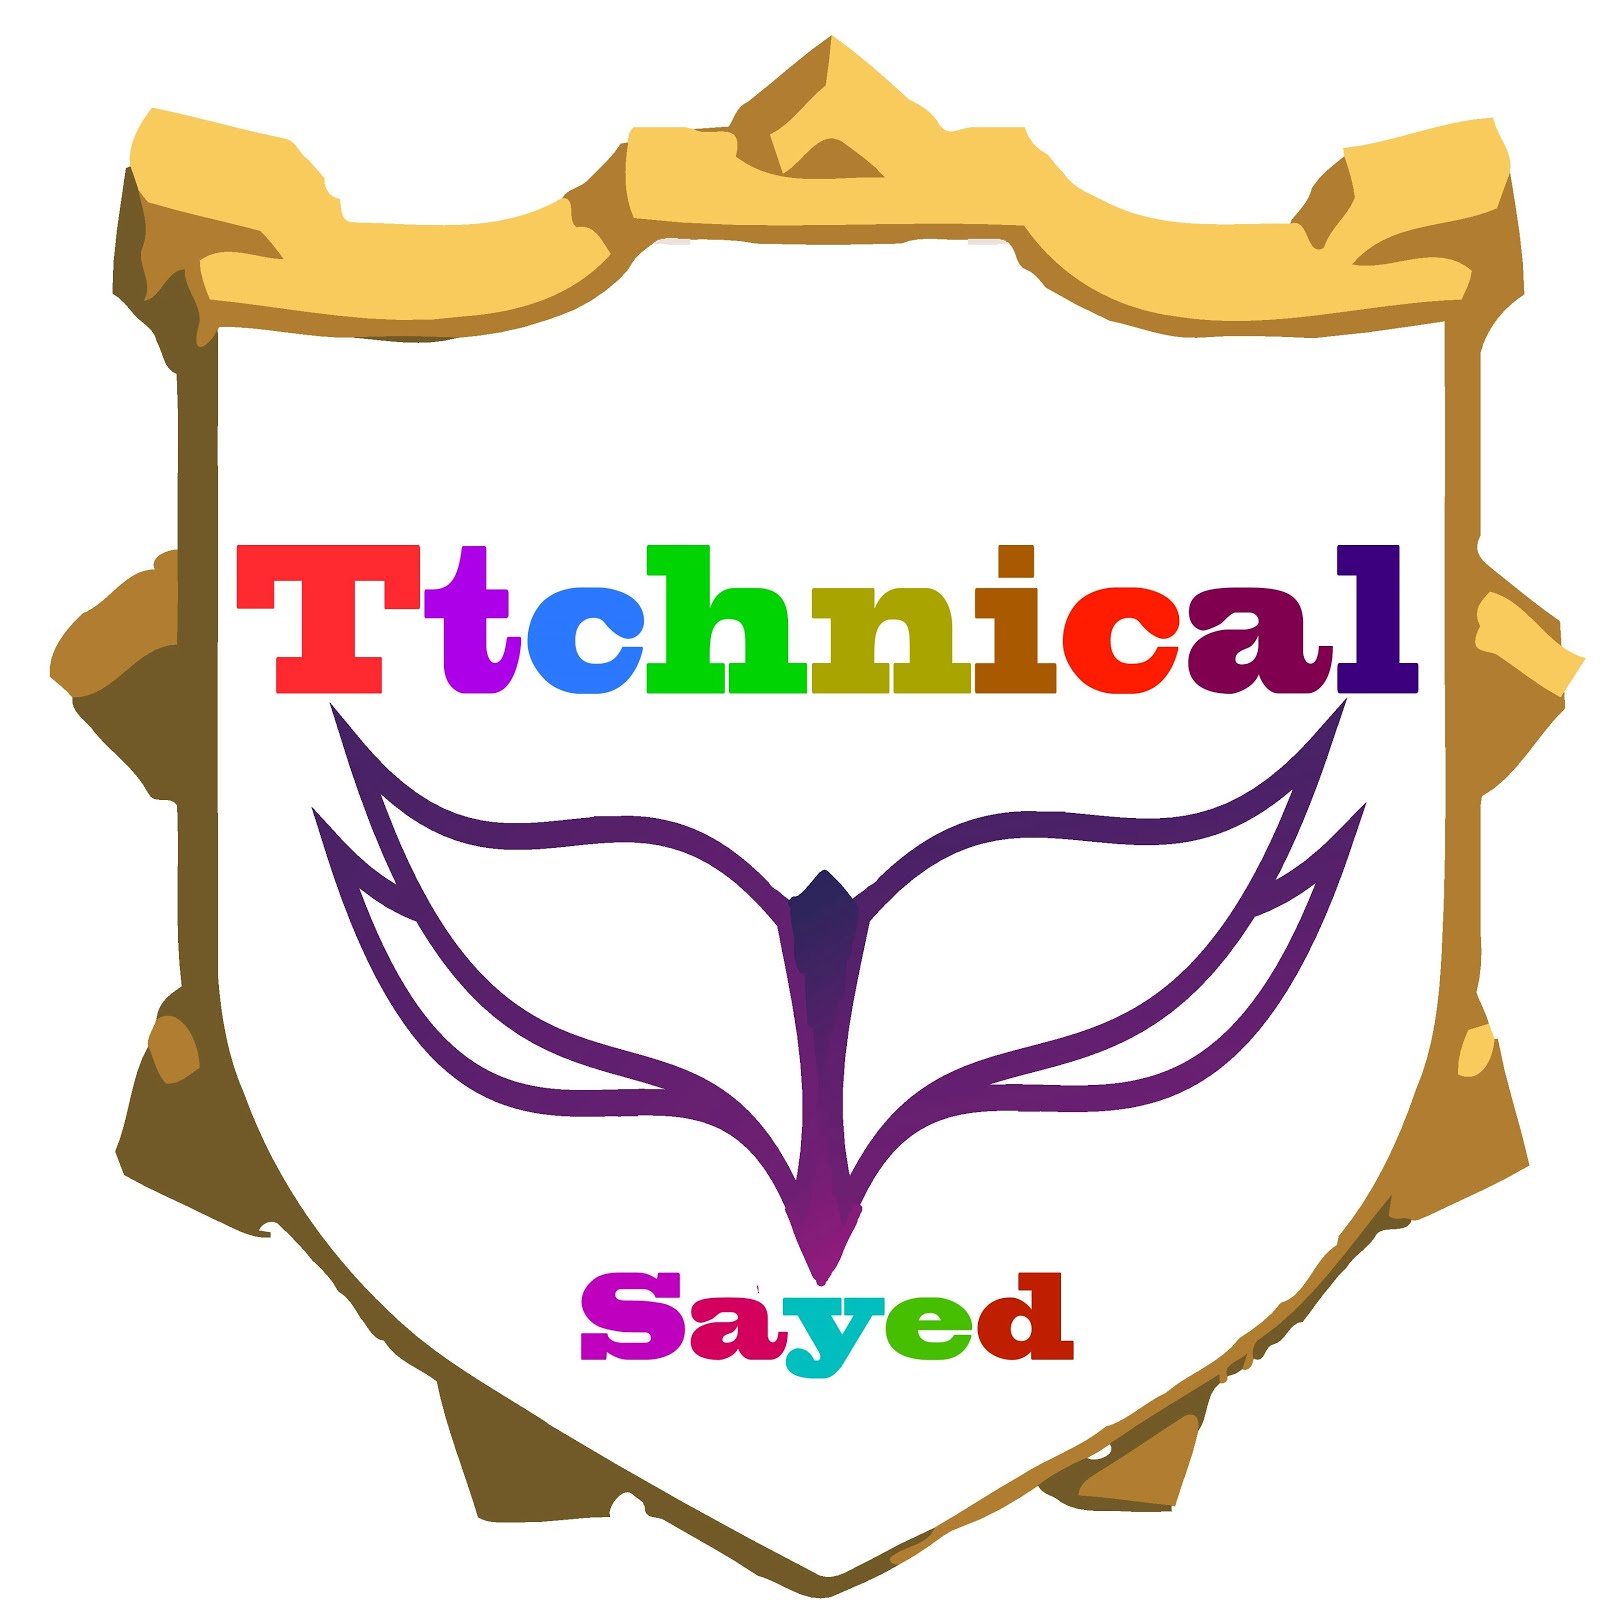 Technical Sayed